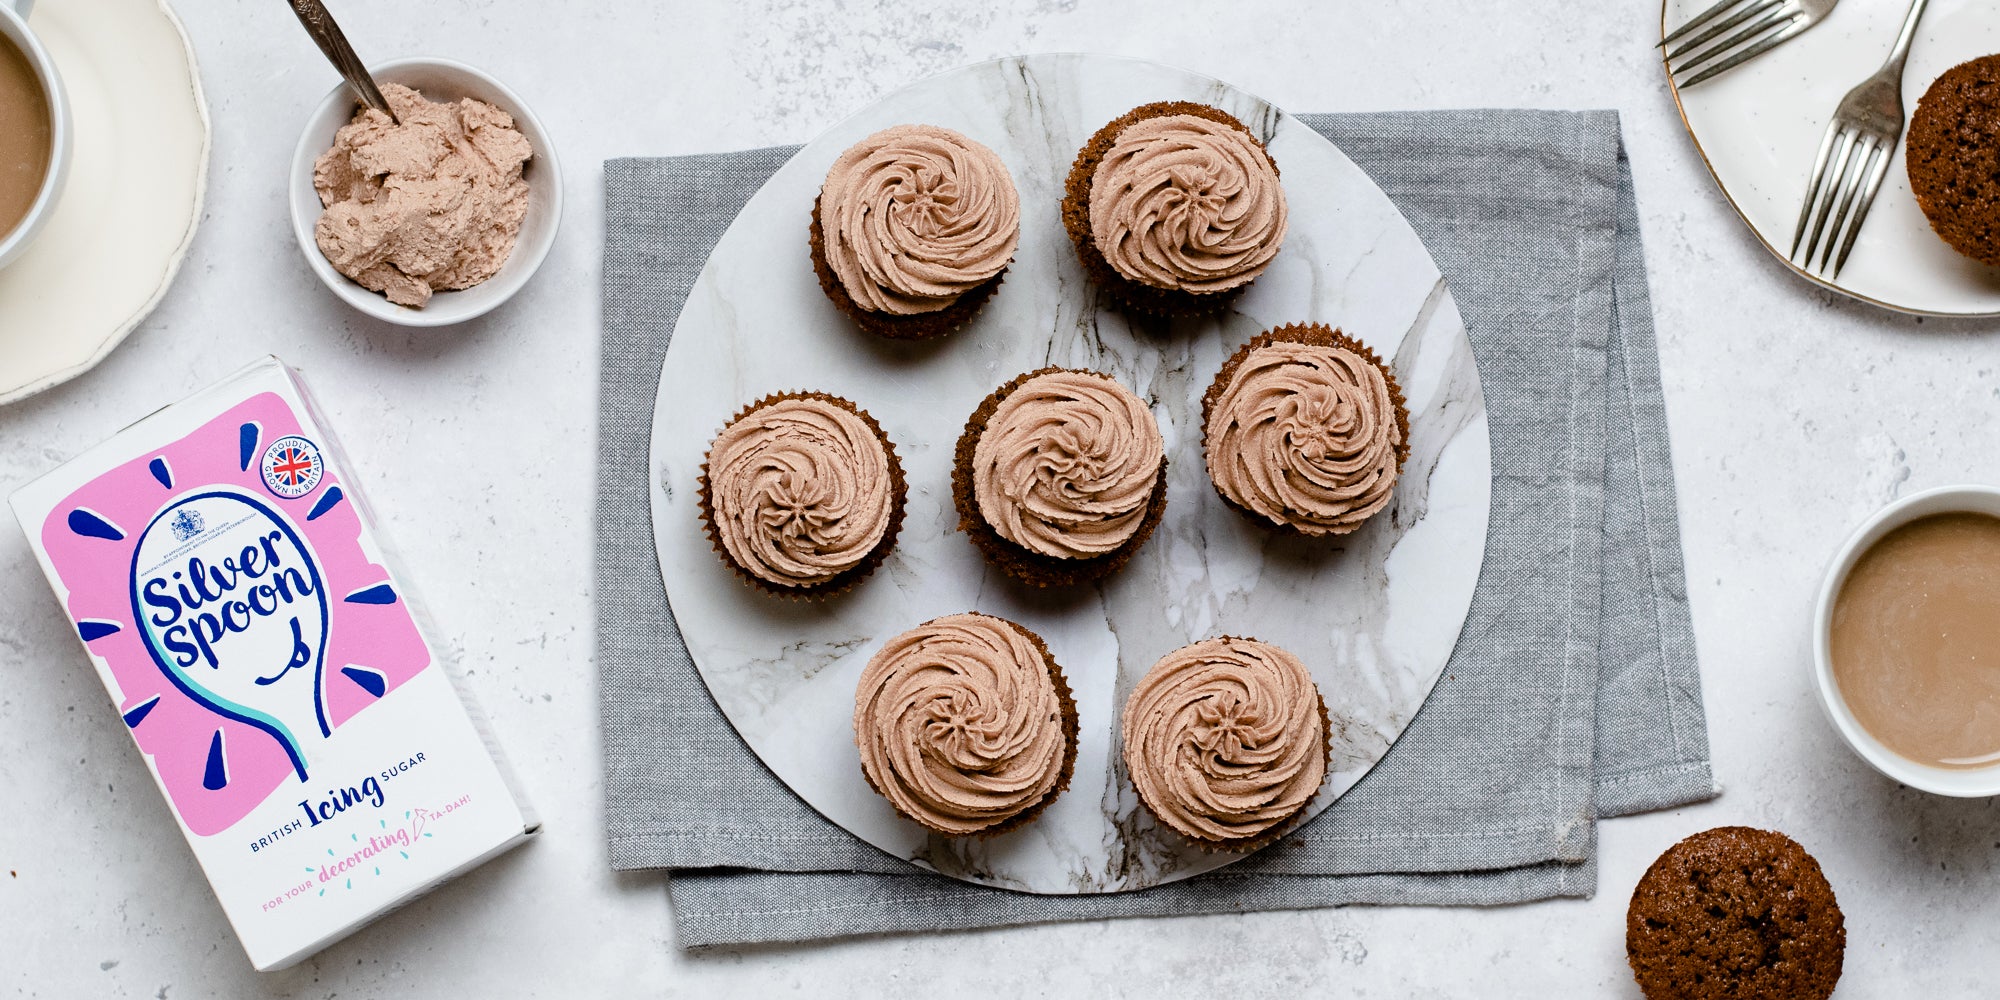 Top view of cupcakes swirled with Dairy Free Vegan Chocolate Buttercream, next to a pack of Silver Spoon Icing Sugar on a linen cloth